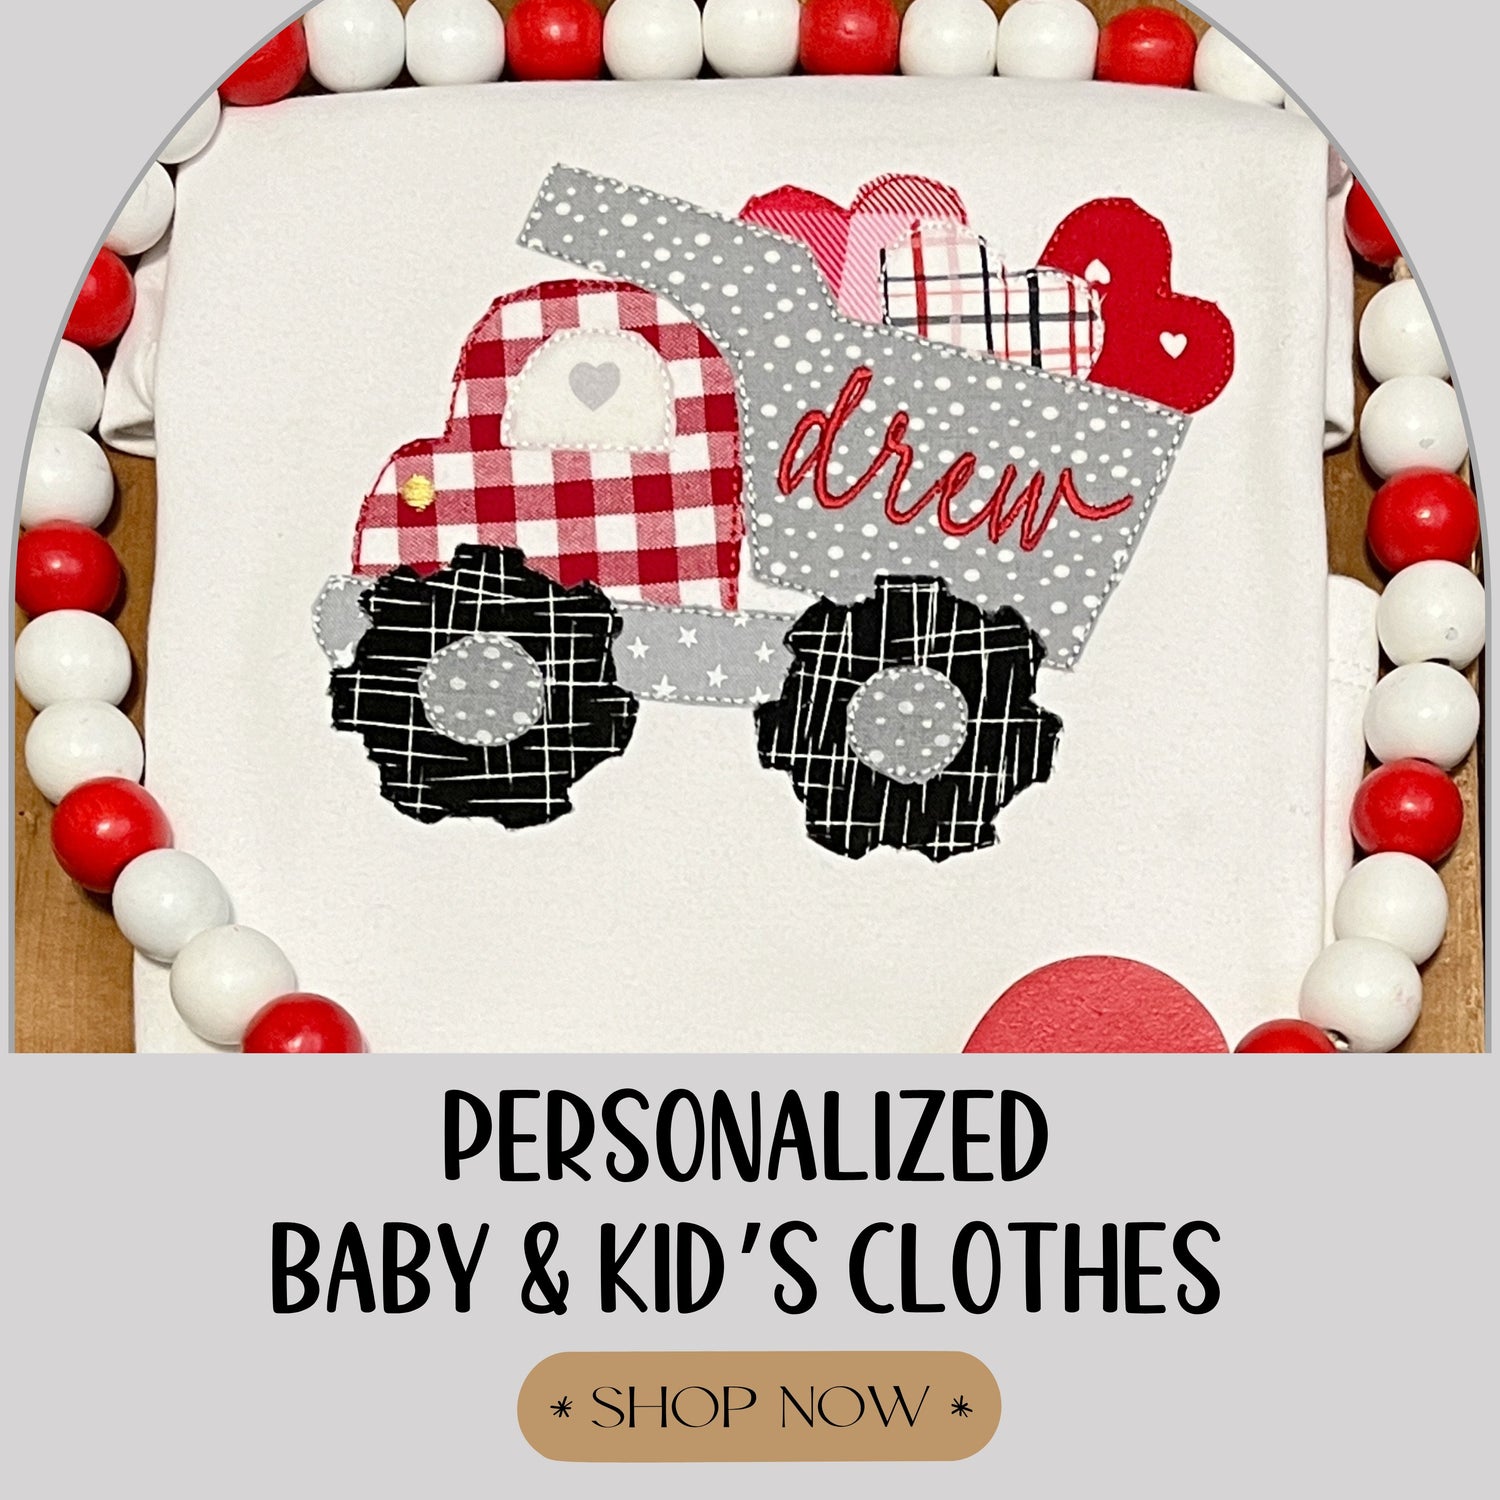 Personalized Children's Clothes & Girl's Dresses